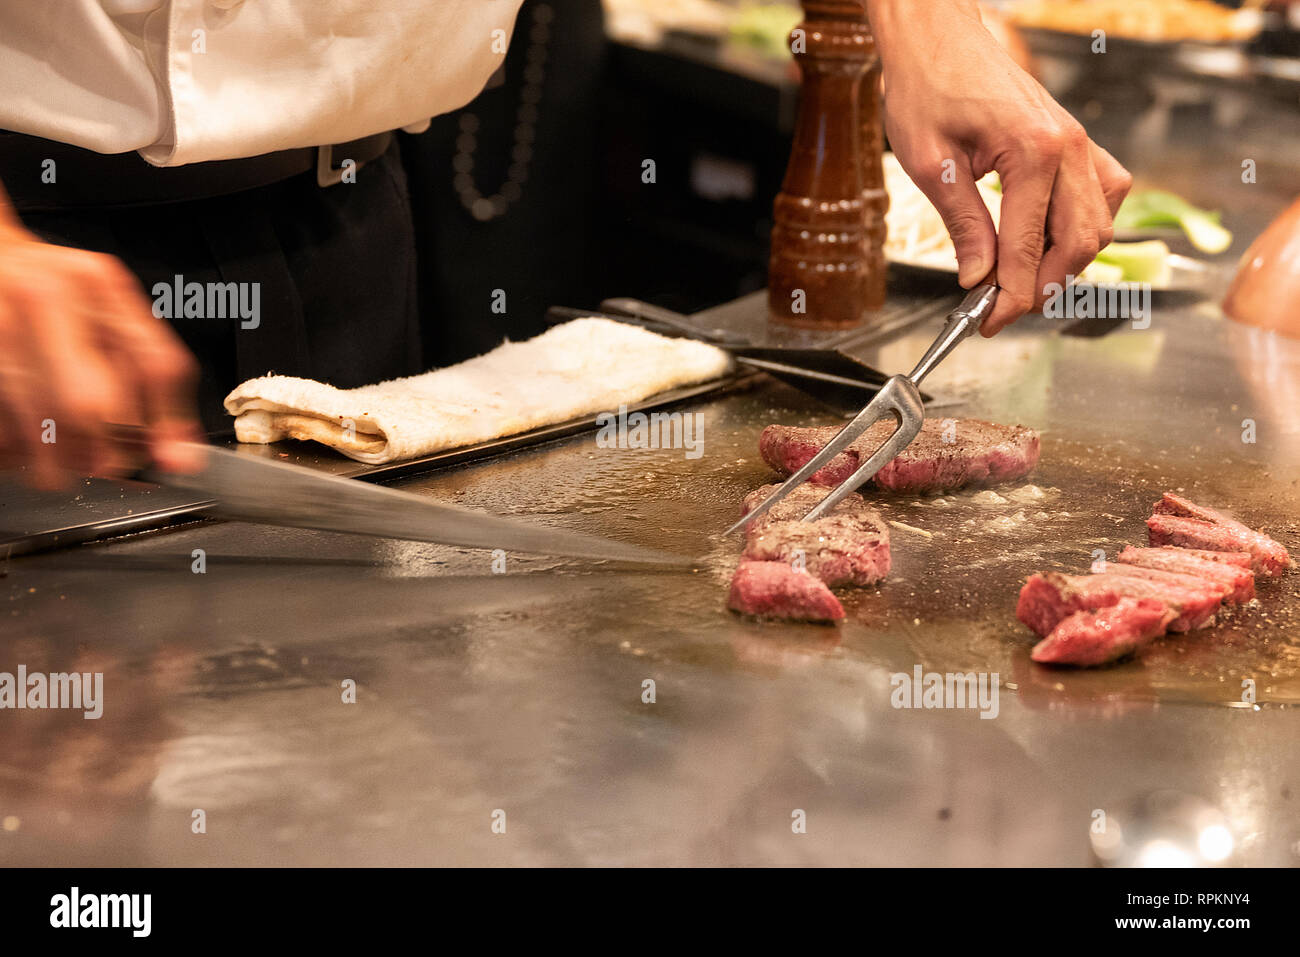 Chef at teppenyaki restaurant in Tokyo, Japan slicing Kobe beef on cooking surface Stock Photo